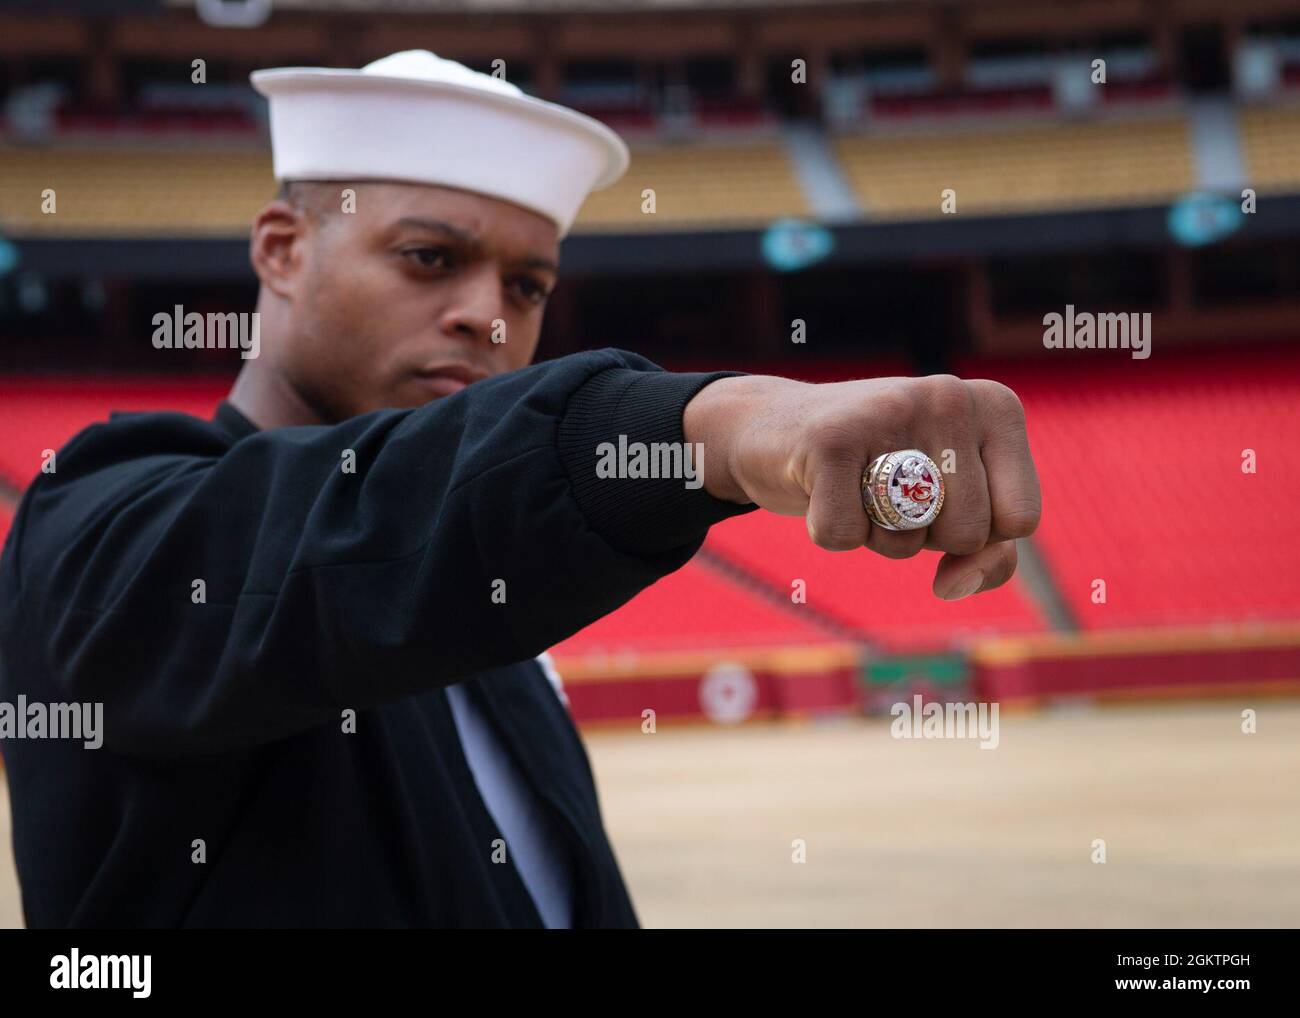 Aviation Structural Mechanic 3rd Class Kristopher Williams, assigned to U.S. Navy Ceremonial Guard “Drill Team Platoon”, poses for a photo with a Kansas City Chiefs Superbowl ring during a tour of Government Employees Health Association Field at Arrowhead Stadium in Kansas City, Missouri July 1, 2021. GEHA Field at Arrowhead Stadium is home to the Kansas City Chiefs NFL team. The event was part of Kansas City Navy Week, the first in-person Navy Week since the beginning of the COVID-19 pandemic, bringing Sailors from different Navy units across the U.S. to conduct focused outreach with members Stock Photo